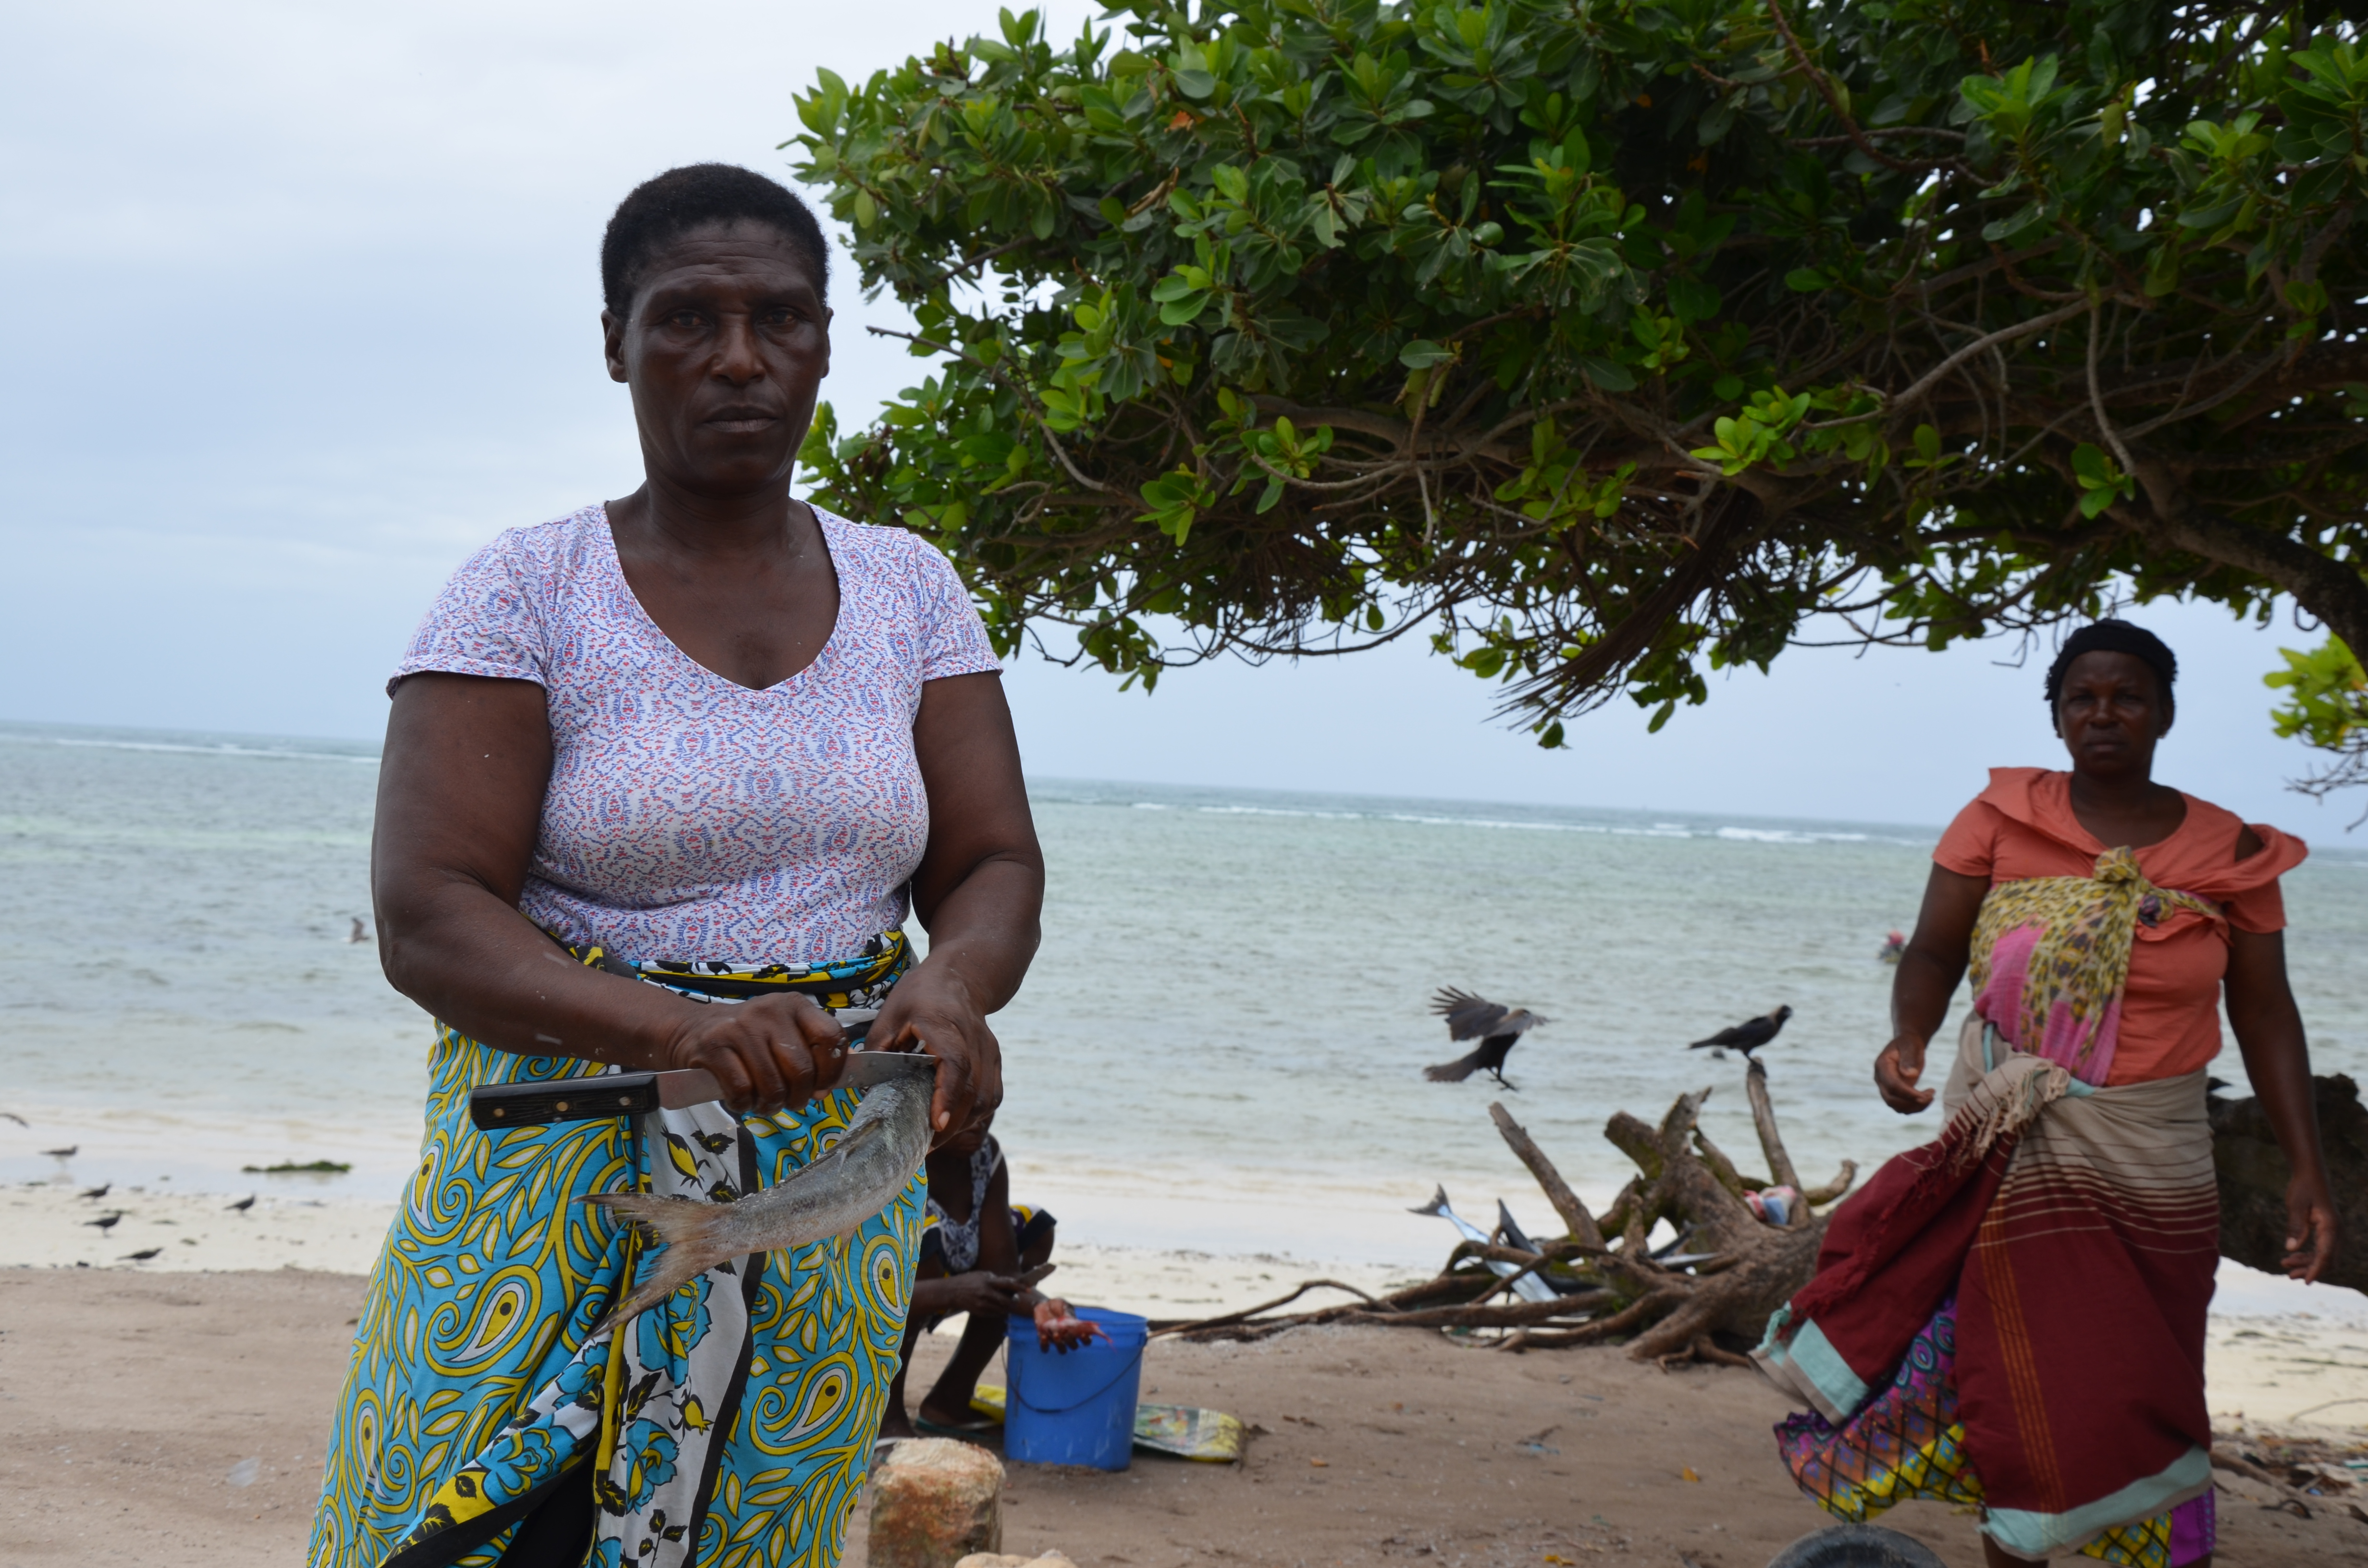 Seasonality of the fish catch is a major challenge for Mary. During the low season, she may struggle to even buy fish. She would like to receive training to better manage her business and cope during the lean season. 